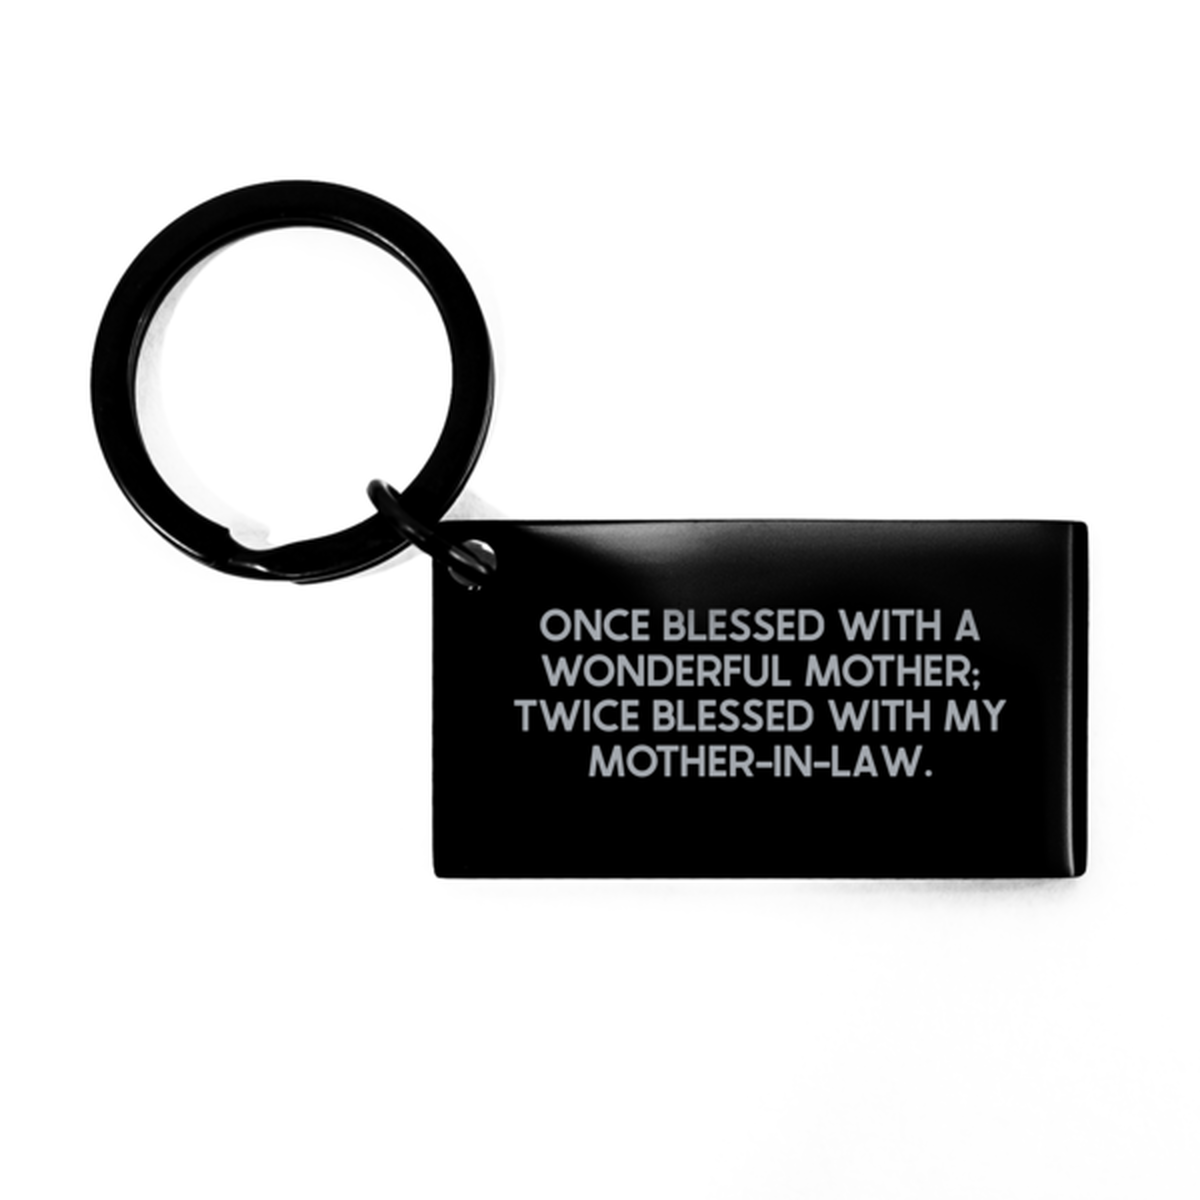 To My Mother-In-Law Black Keychain, Wonderful Mother, Mothers Day Gifts For Mother-In-Law From Daughter-In-Law, Birthday Gifts For Women